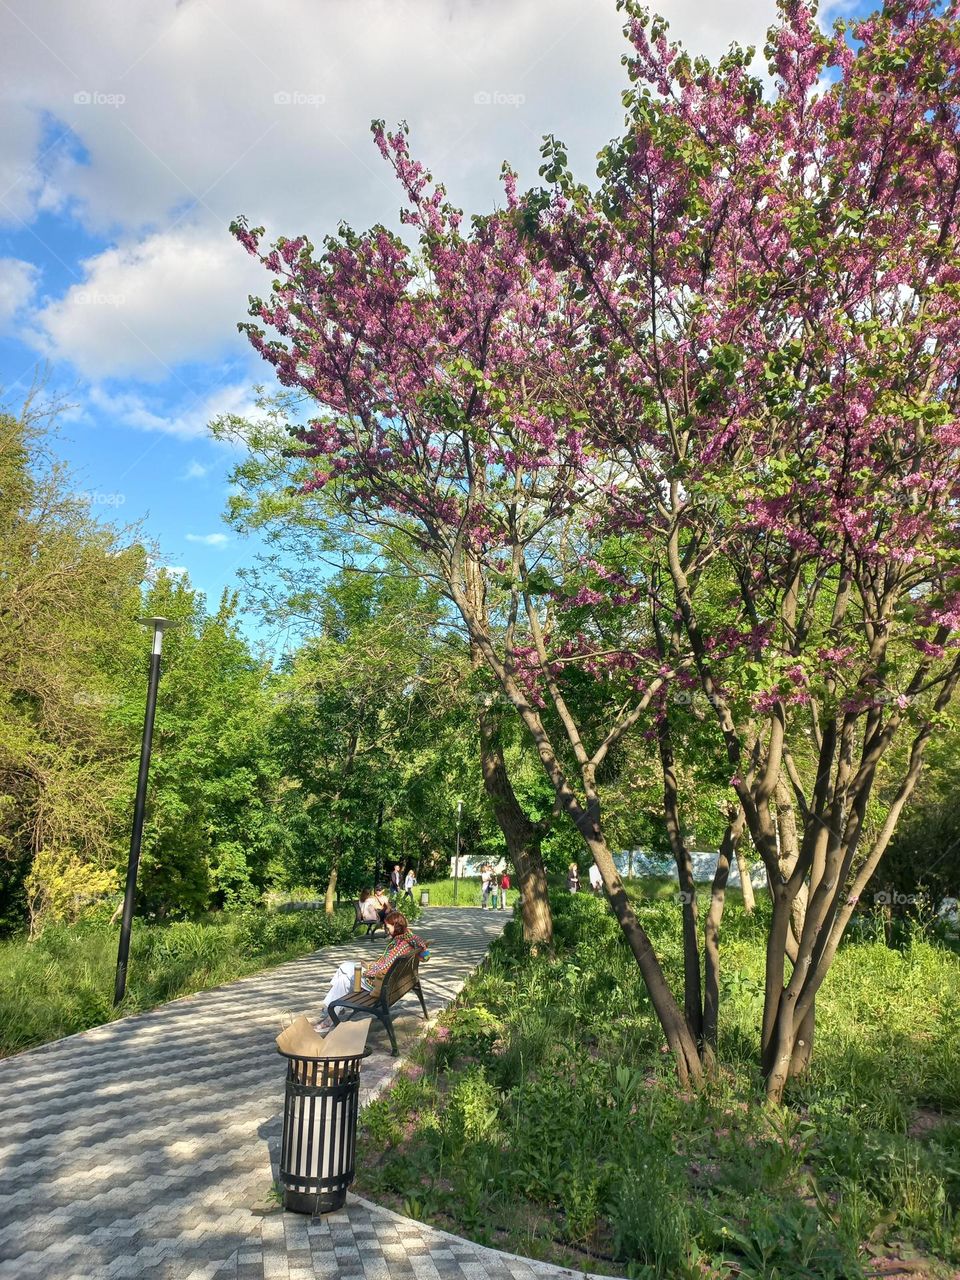 flowering tree in the city park.